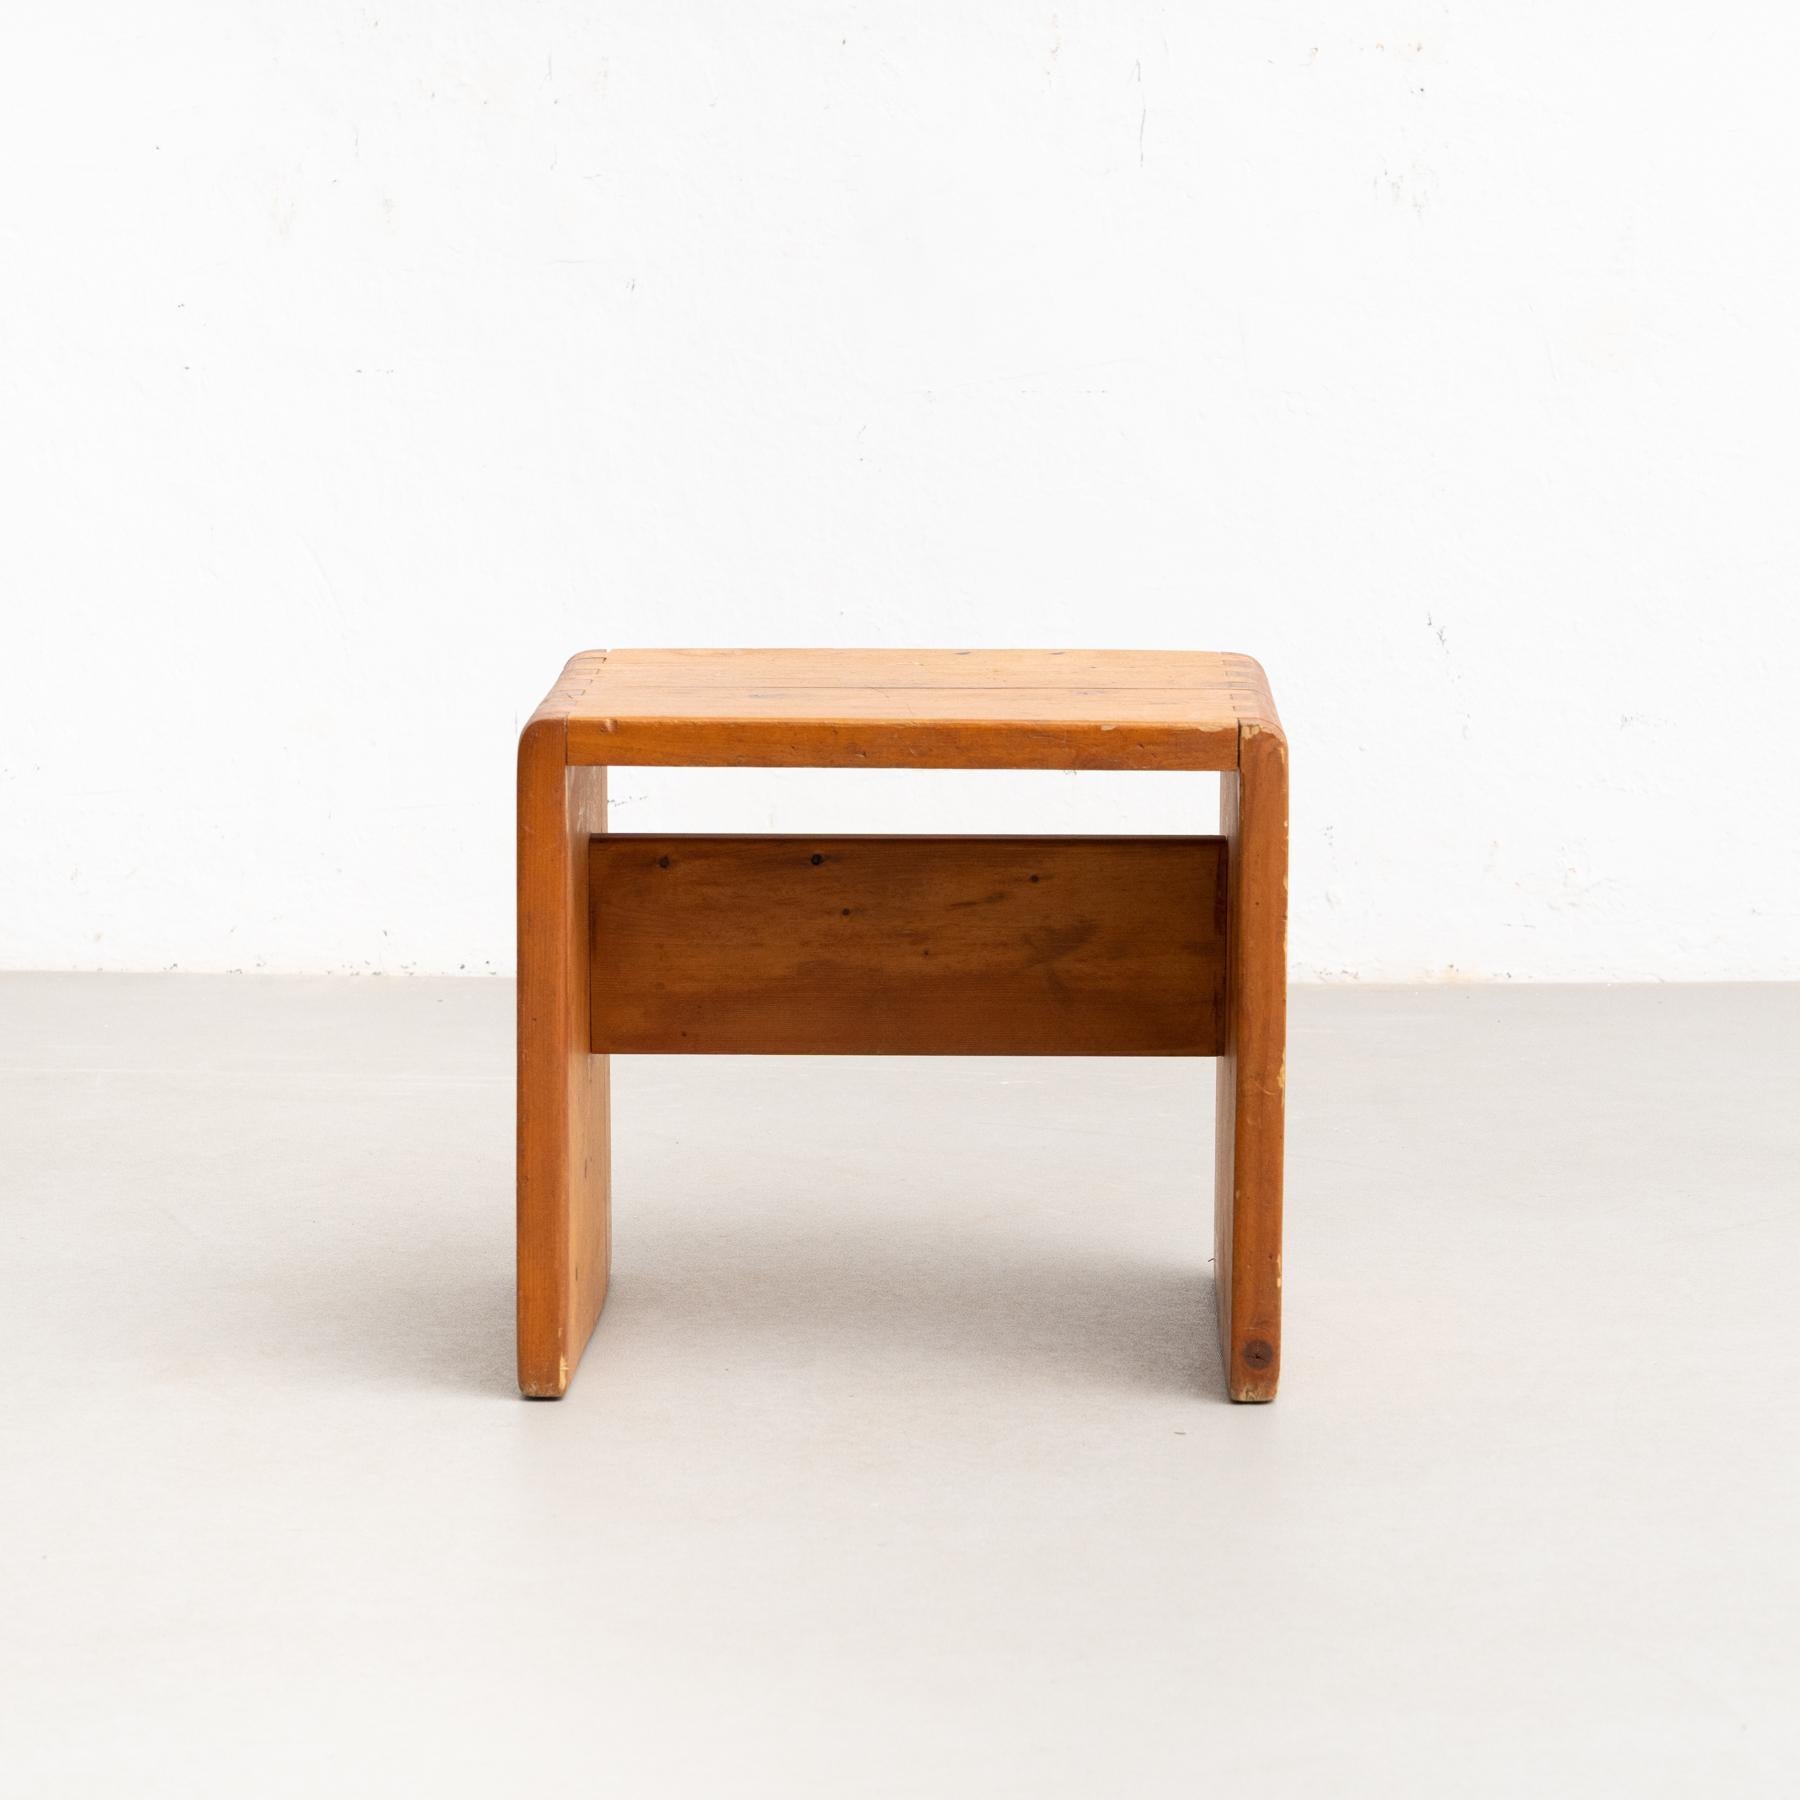 Mid-20th Century Charlotte Perriand Pine Wood Stool for Les Arcs, circa 1950 For Sale